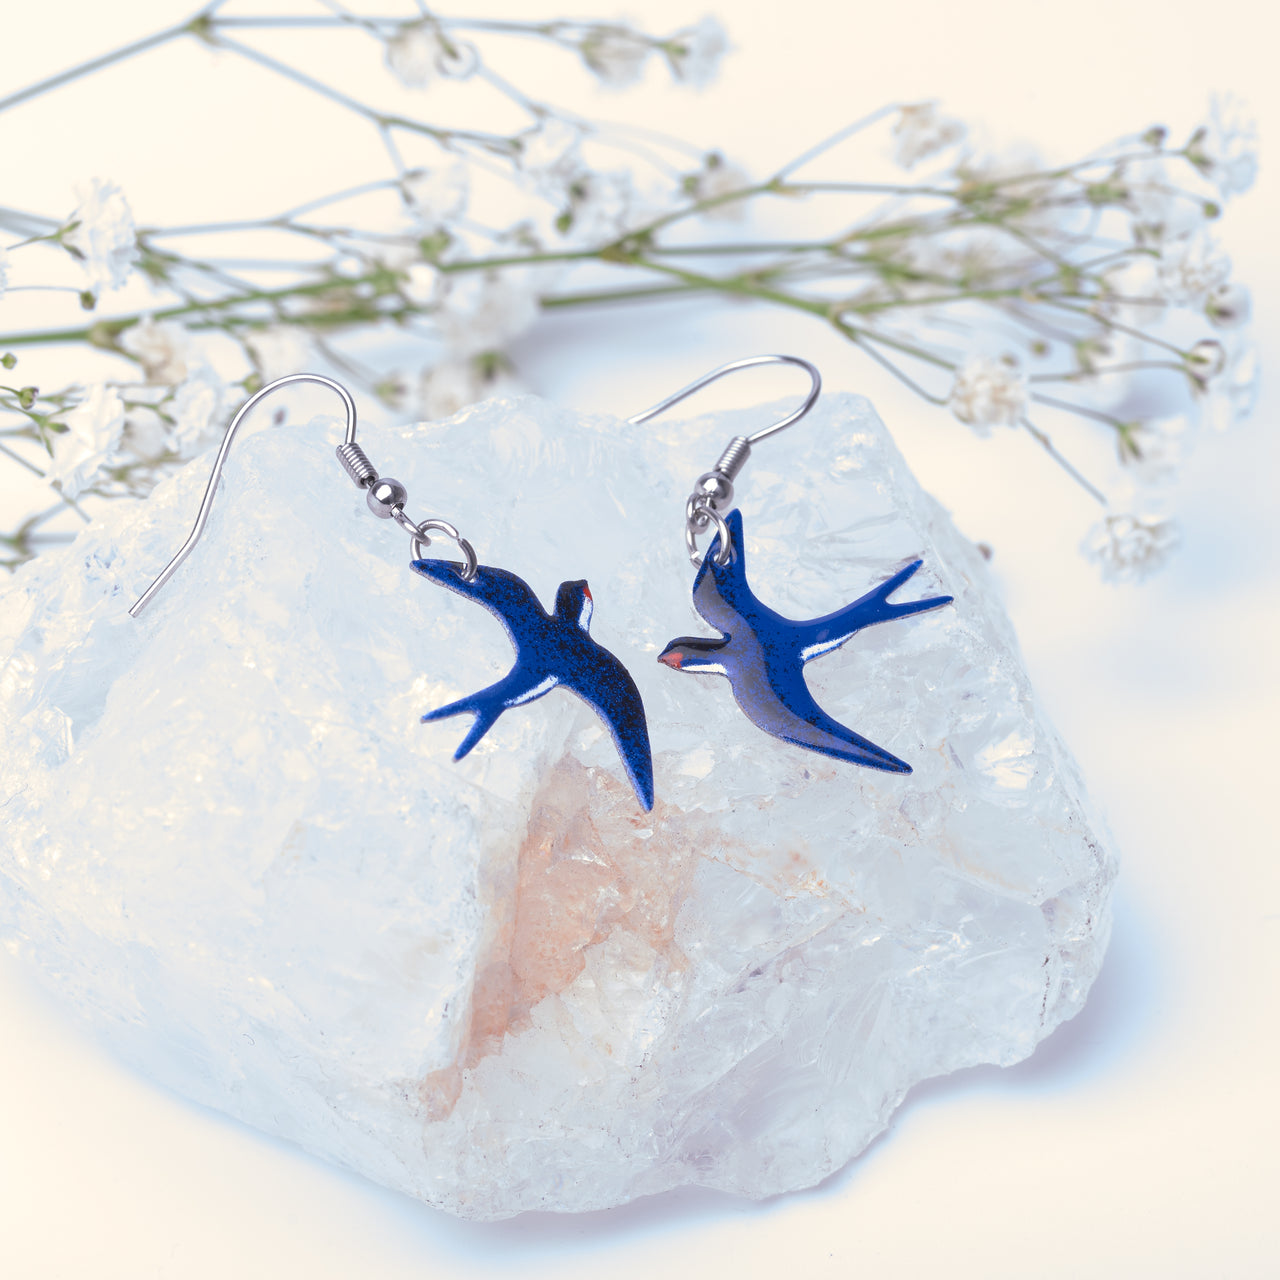 a pair of blue handmade swallow earrings are resting on a crystal